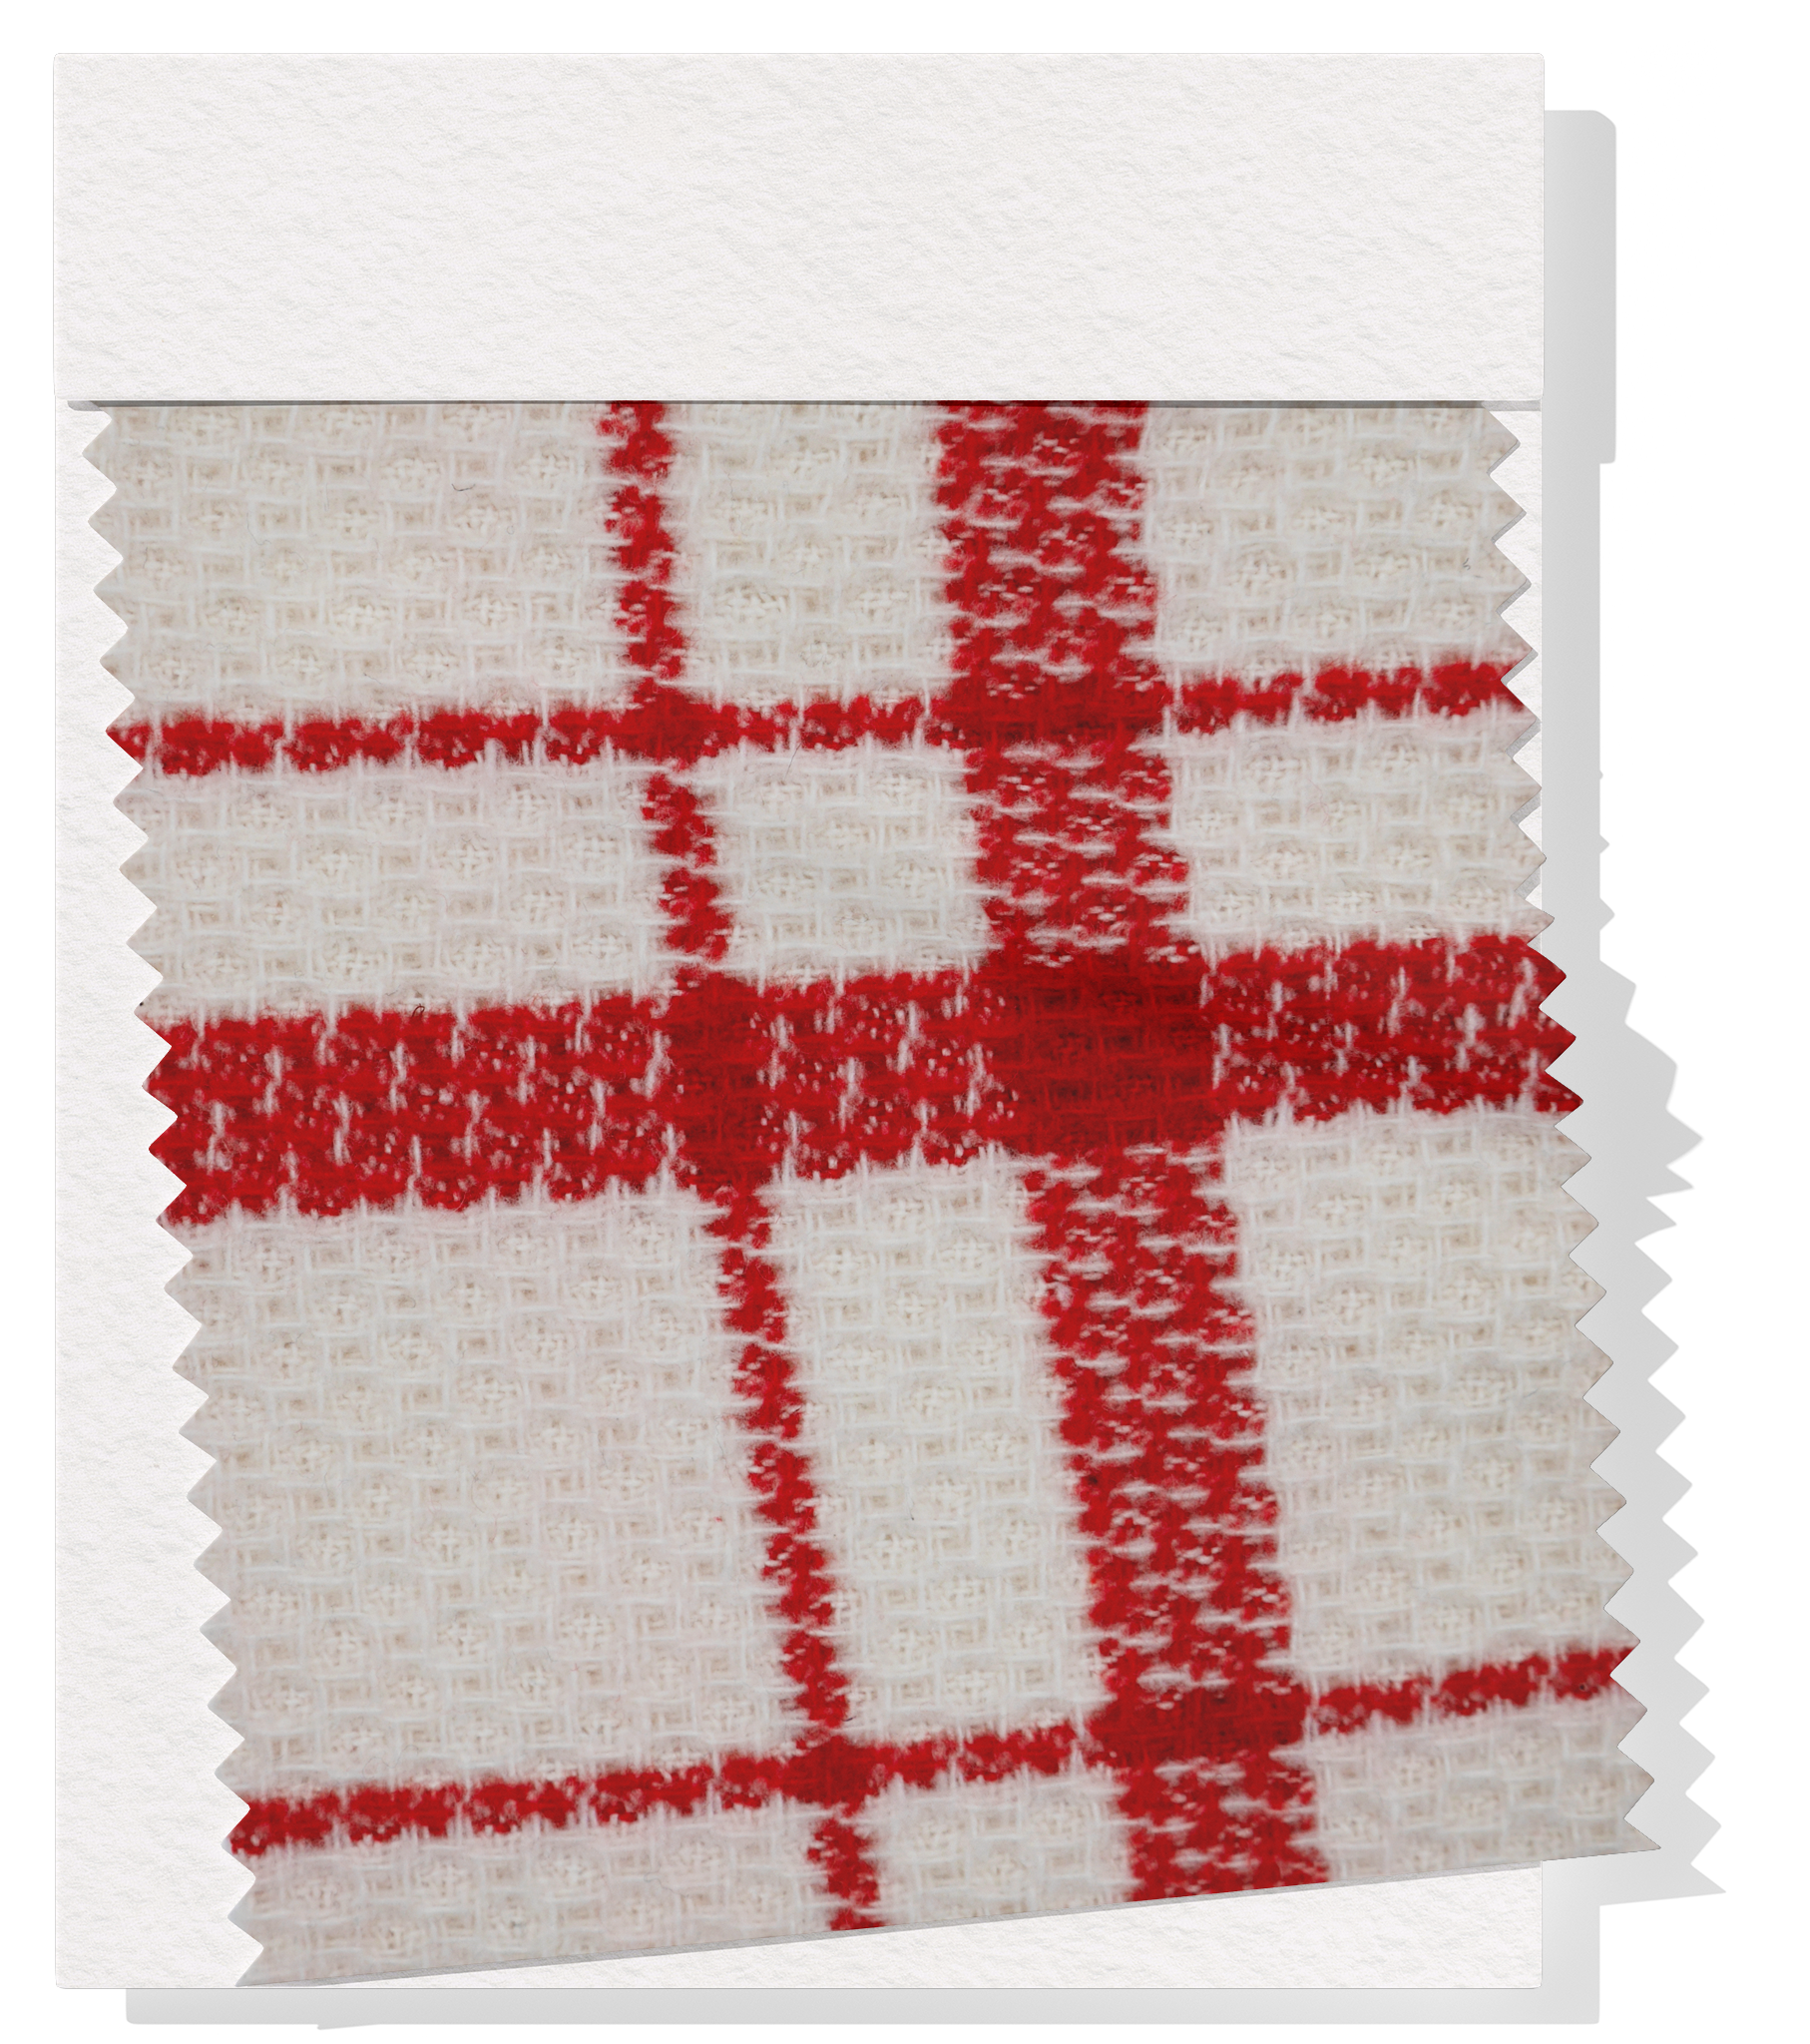 Checked Wool $18.00p/m - White & Red (WC1)